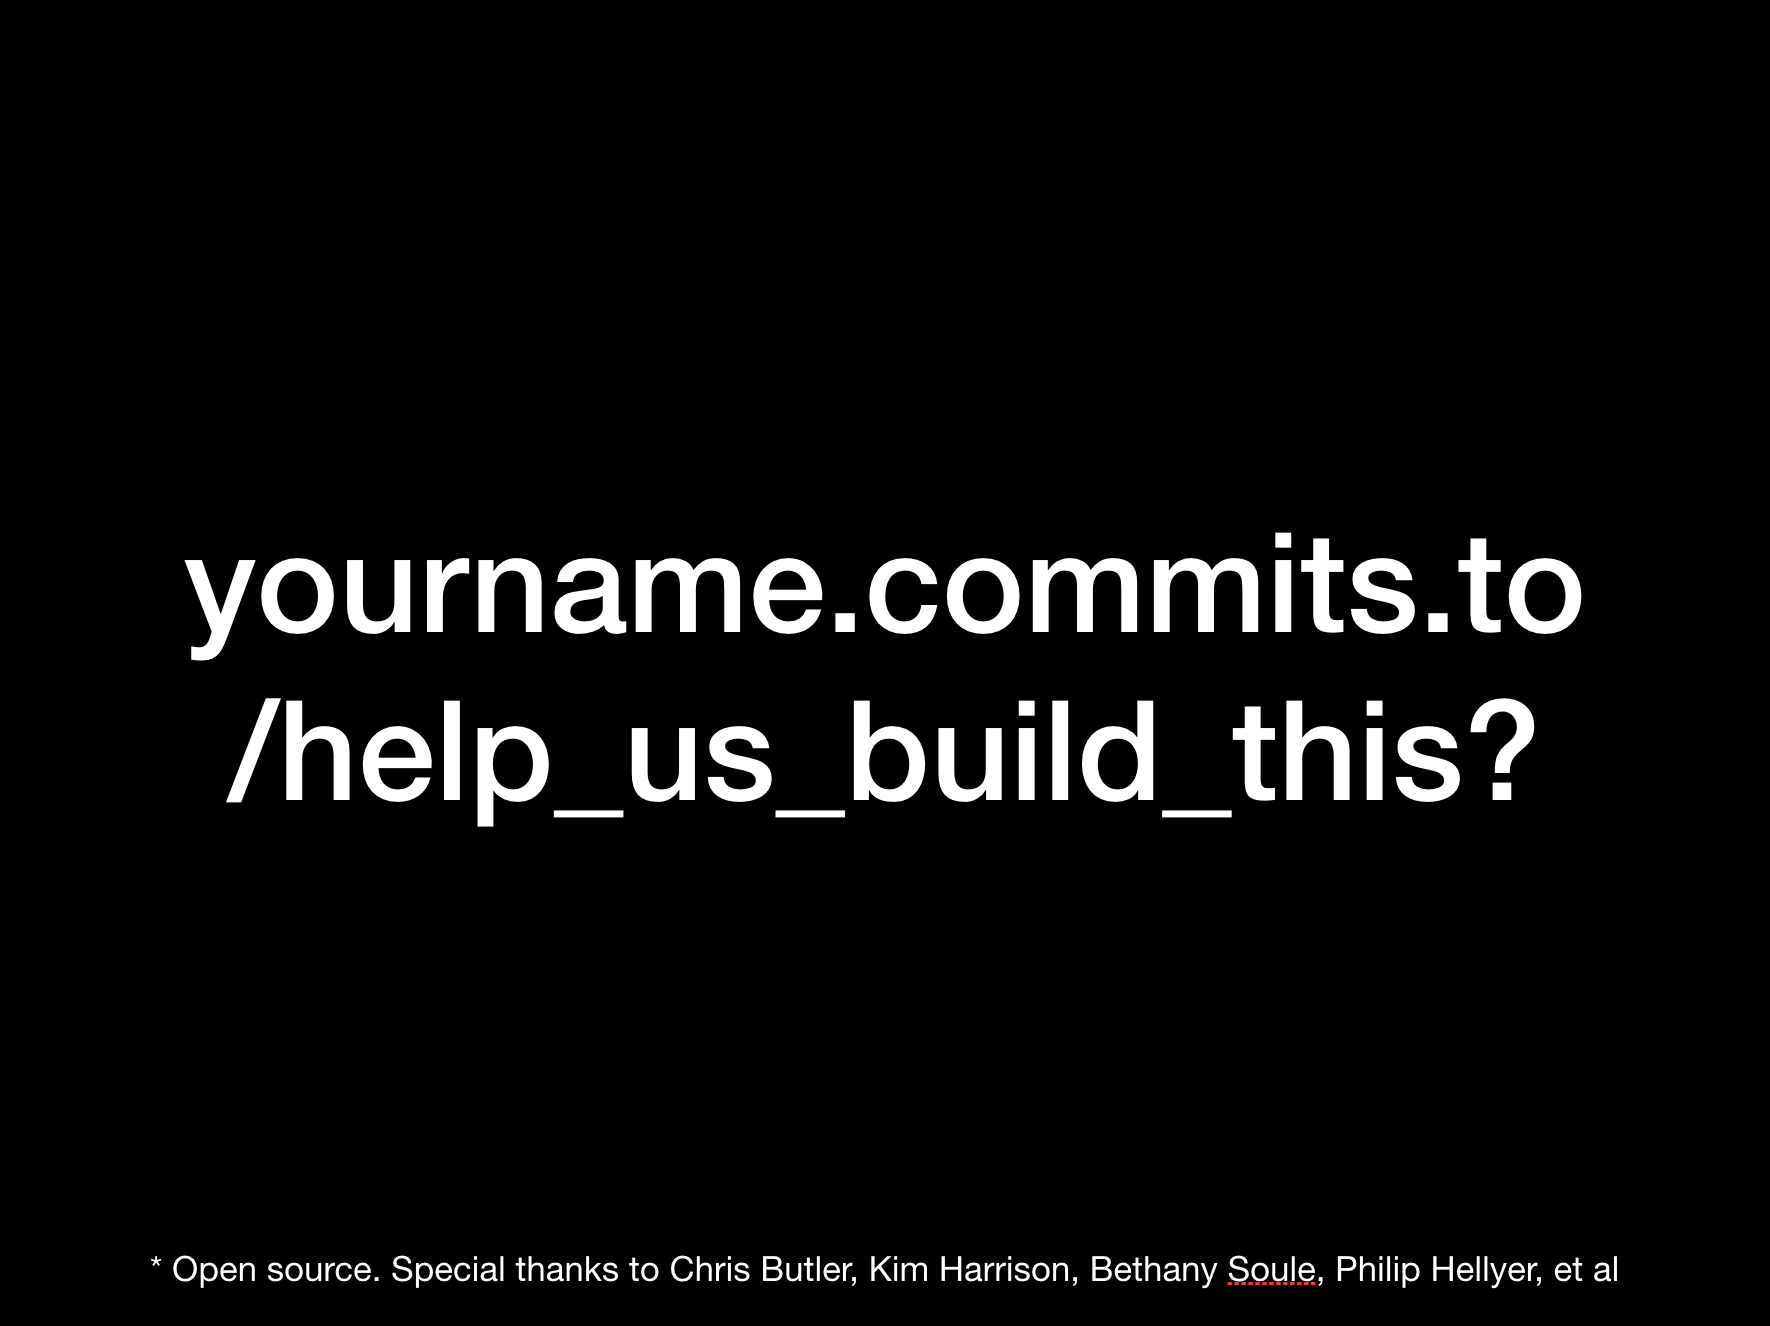 yourname.commits.to/help_us_build_this? * Open source. Special thanks to Chris Butler, Kim Harrison, Bethany Soule, Philip Hellyer, et al